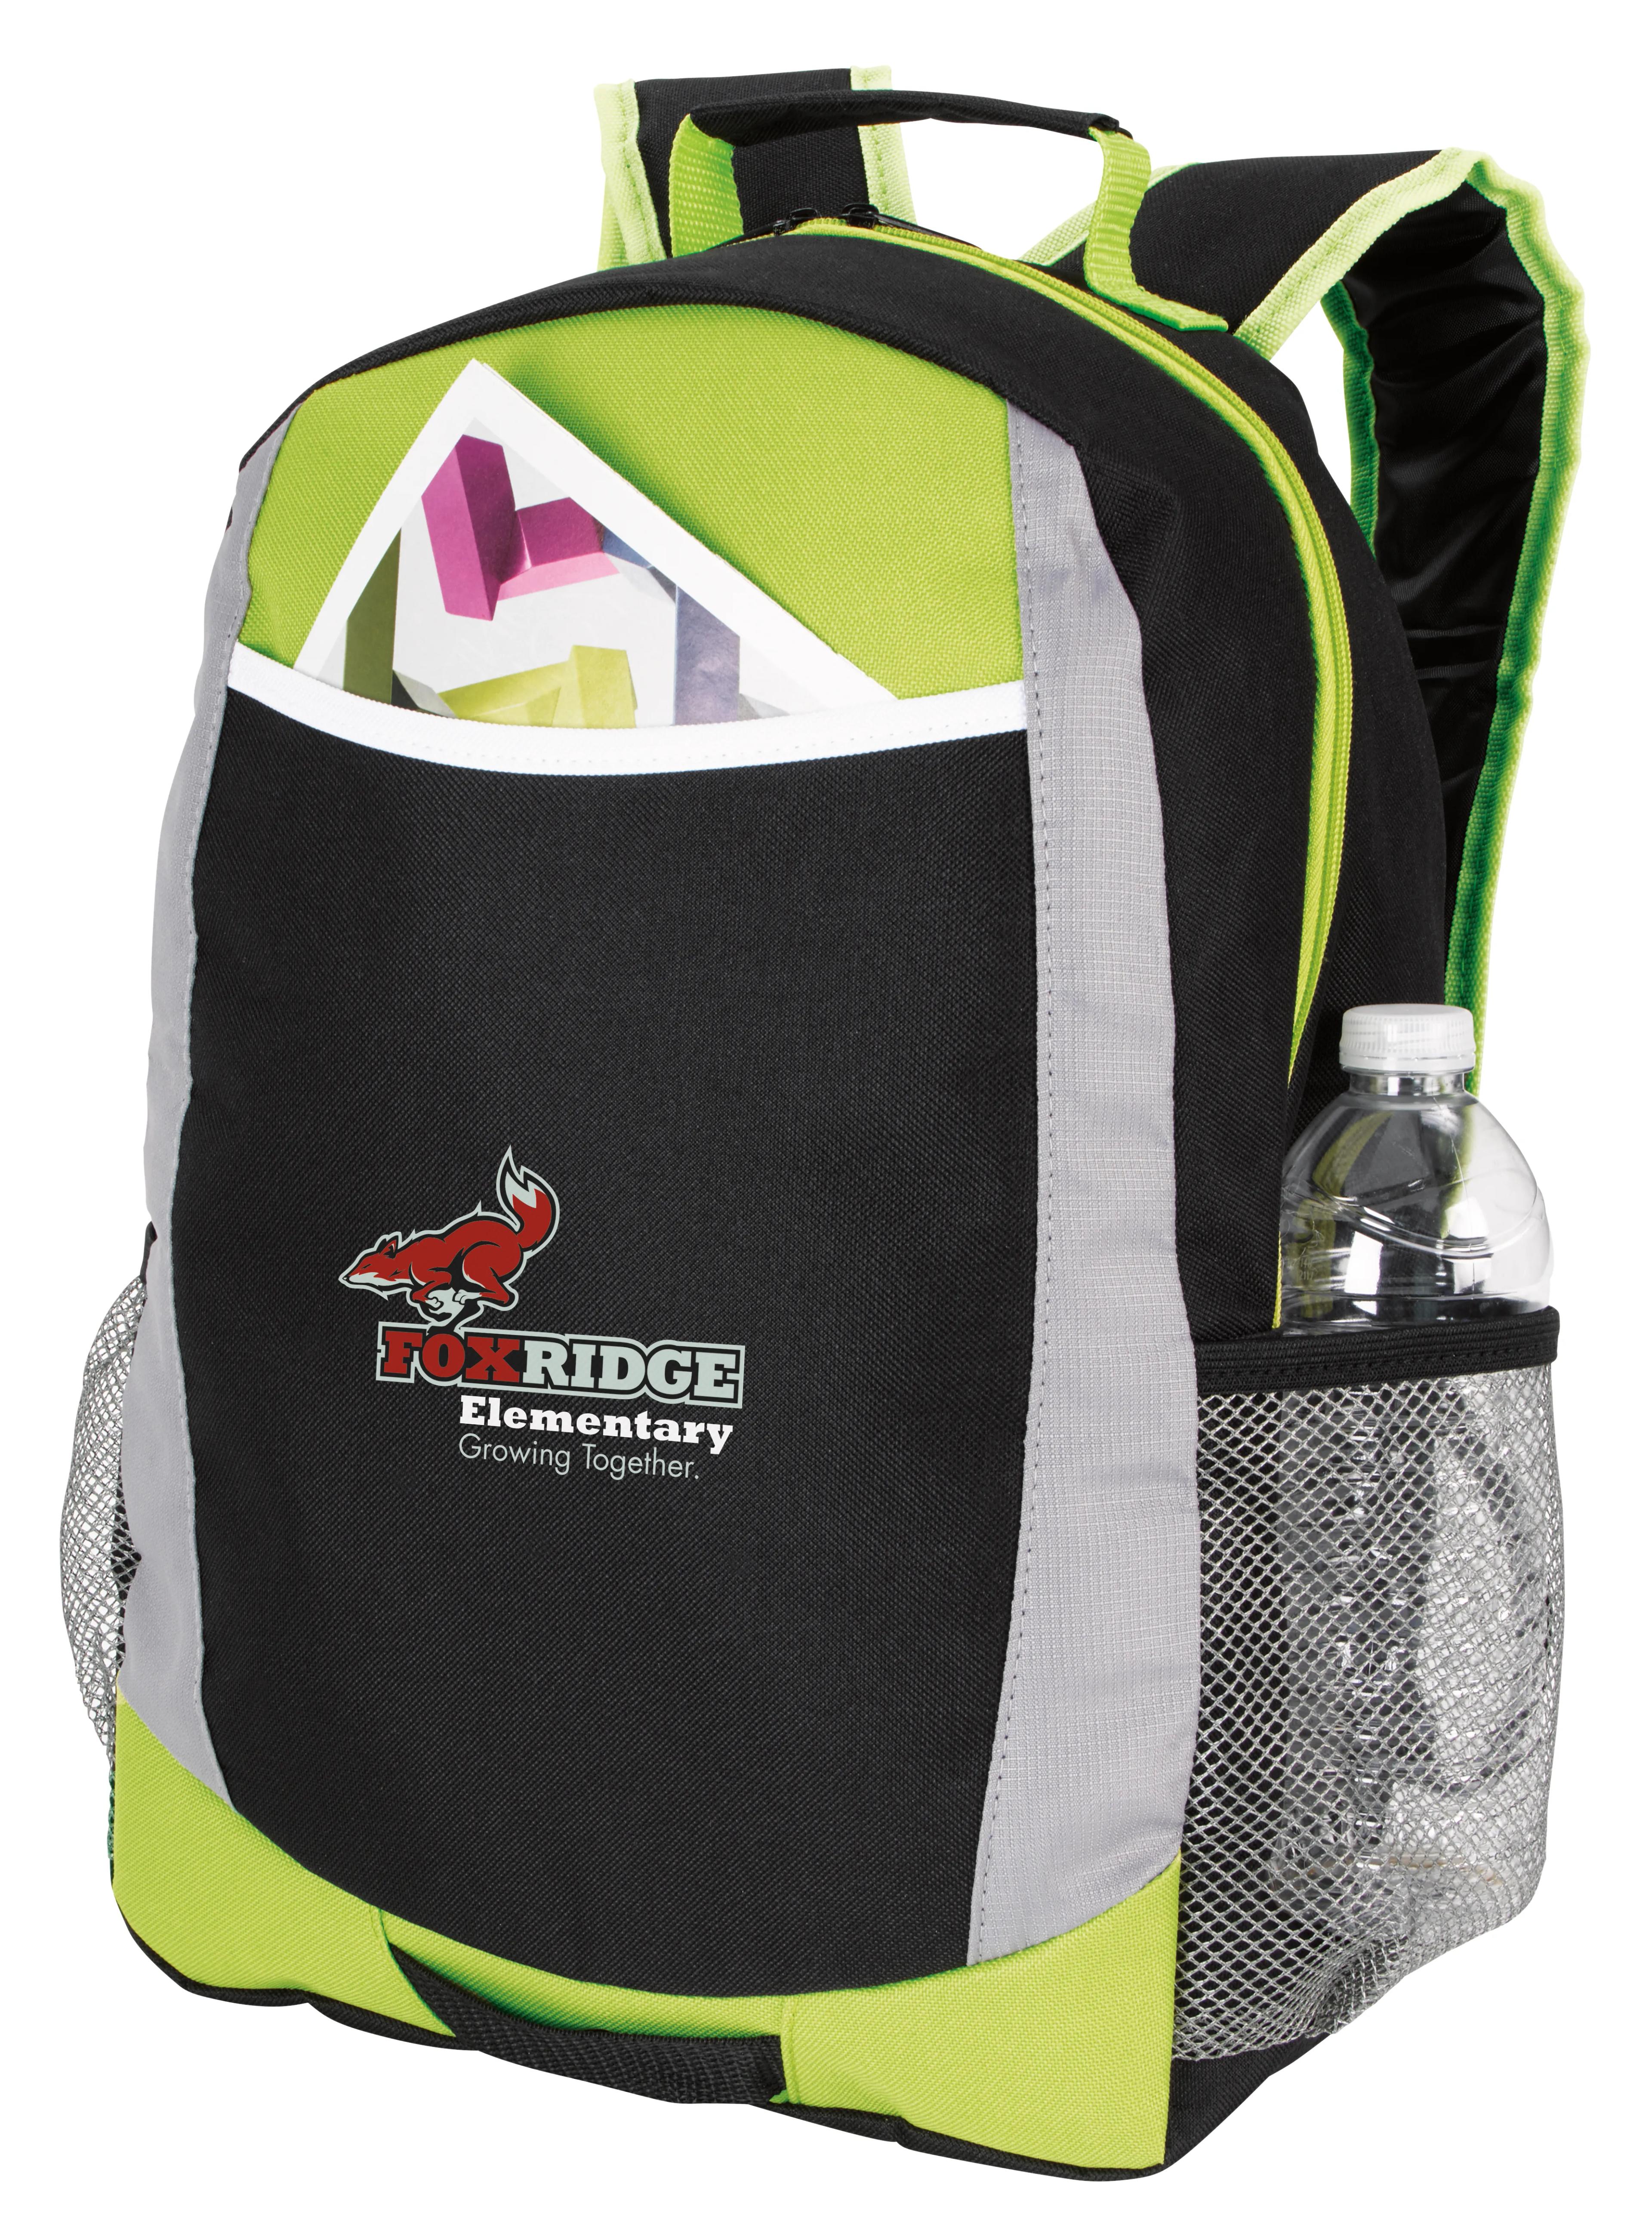 Primary Sport Backpack 10 of 14